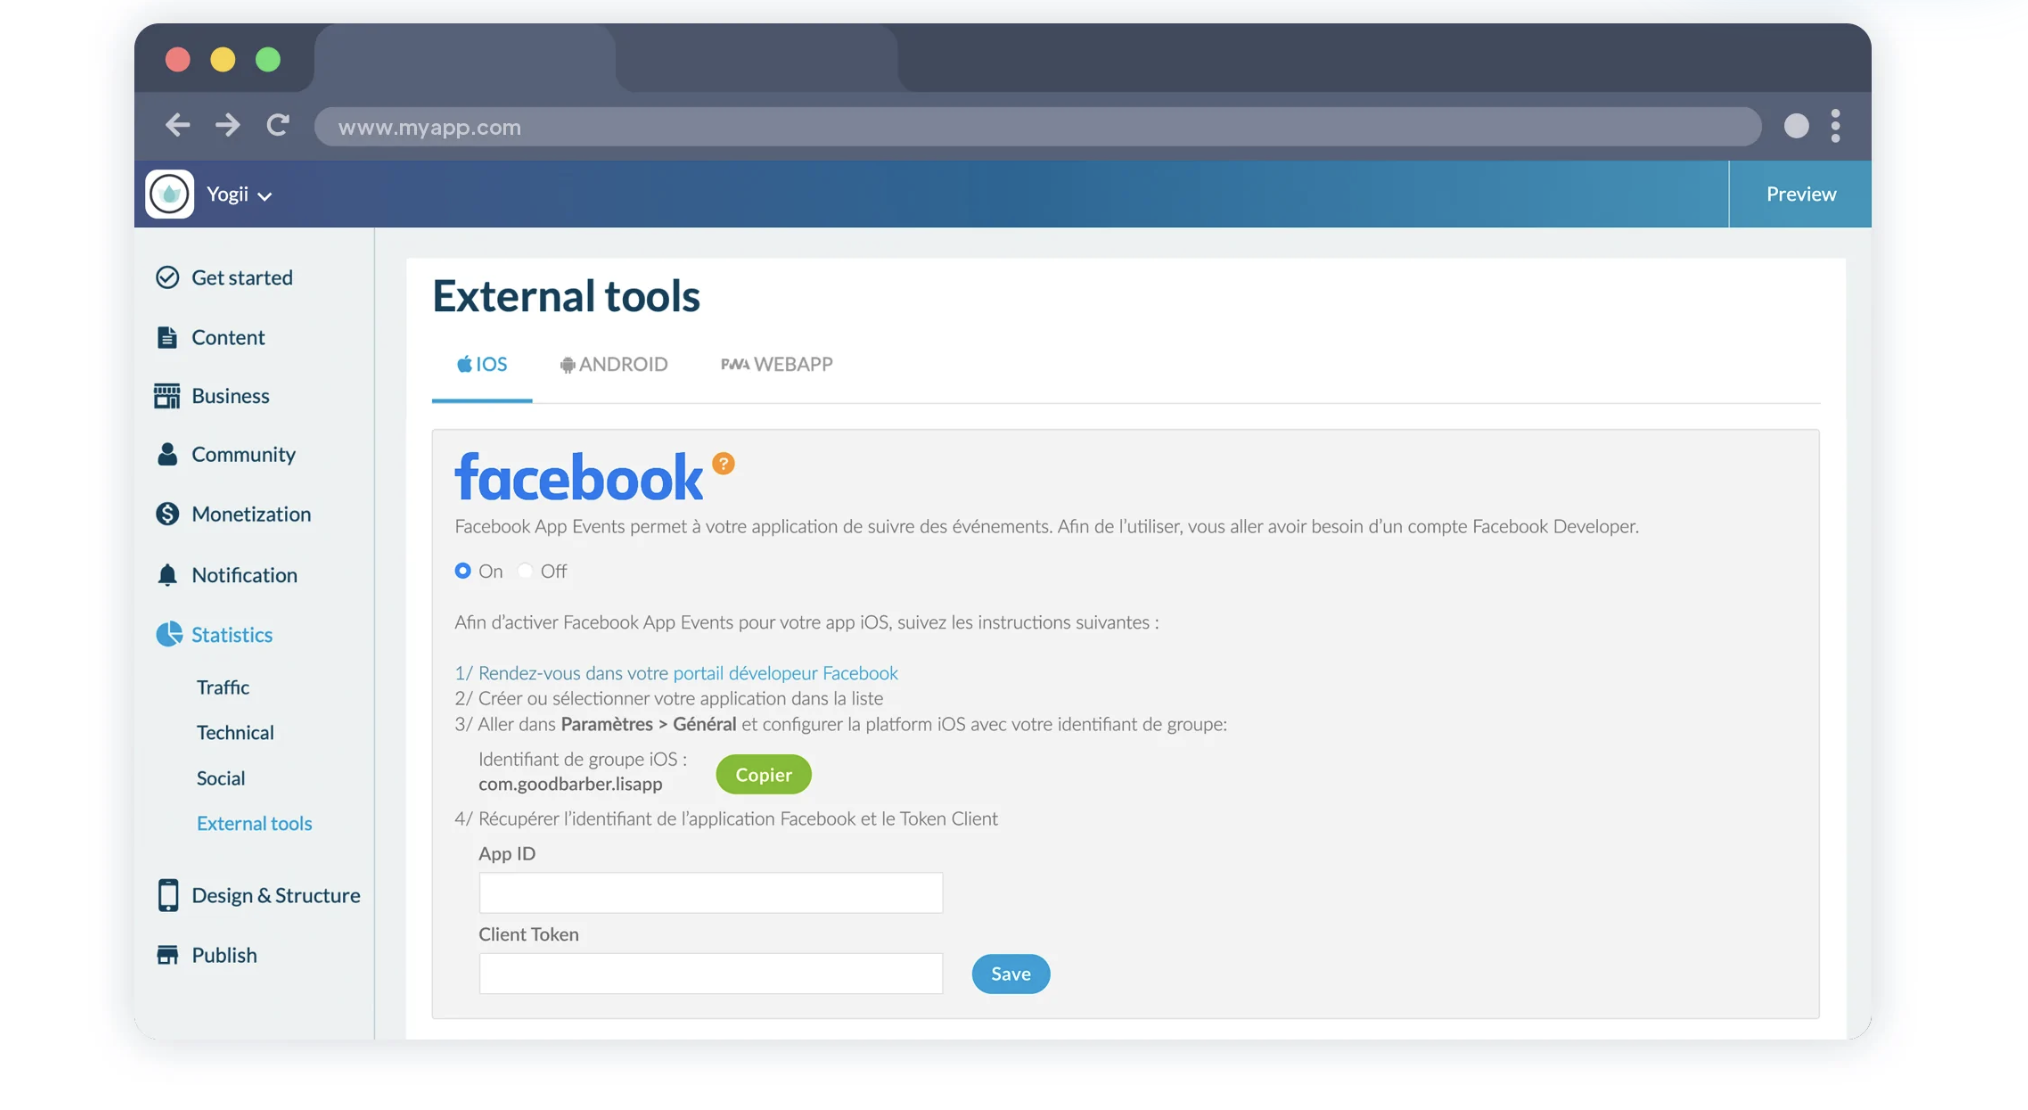 Facebook App Events in your GoodBarber back office